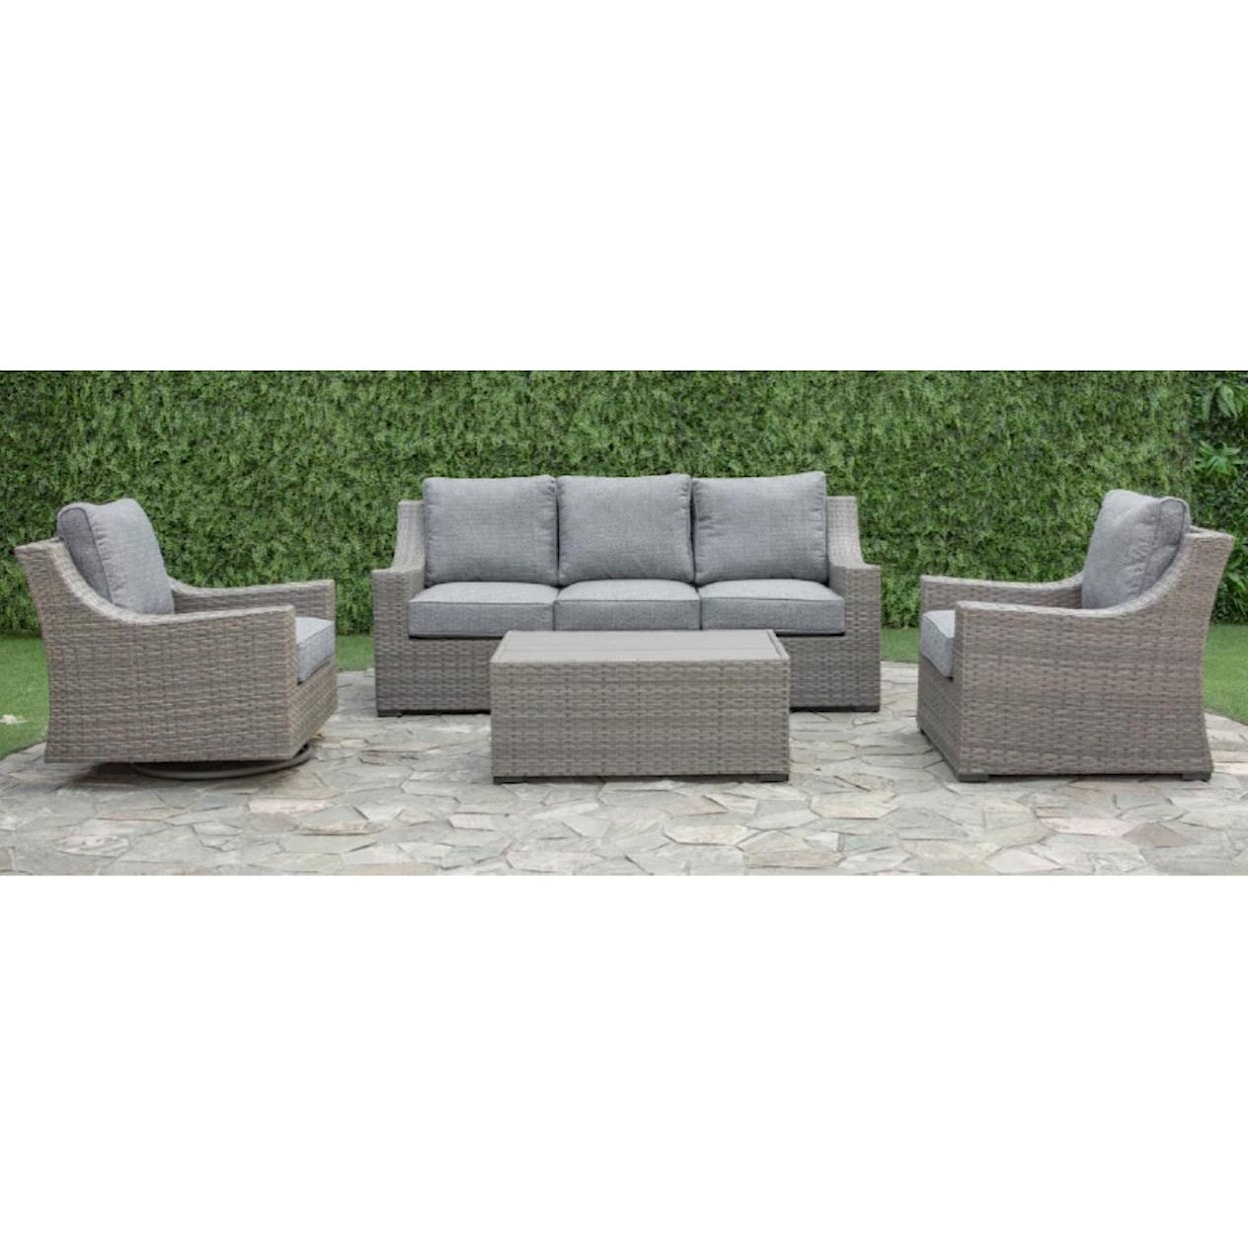 Primo International Newport Primo Outdoor Sofa, Chair and Cocktail Table